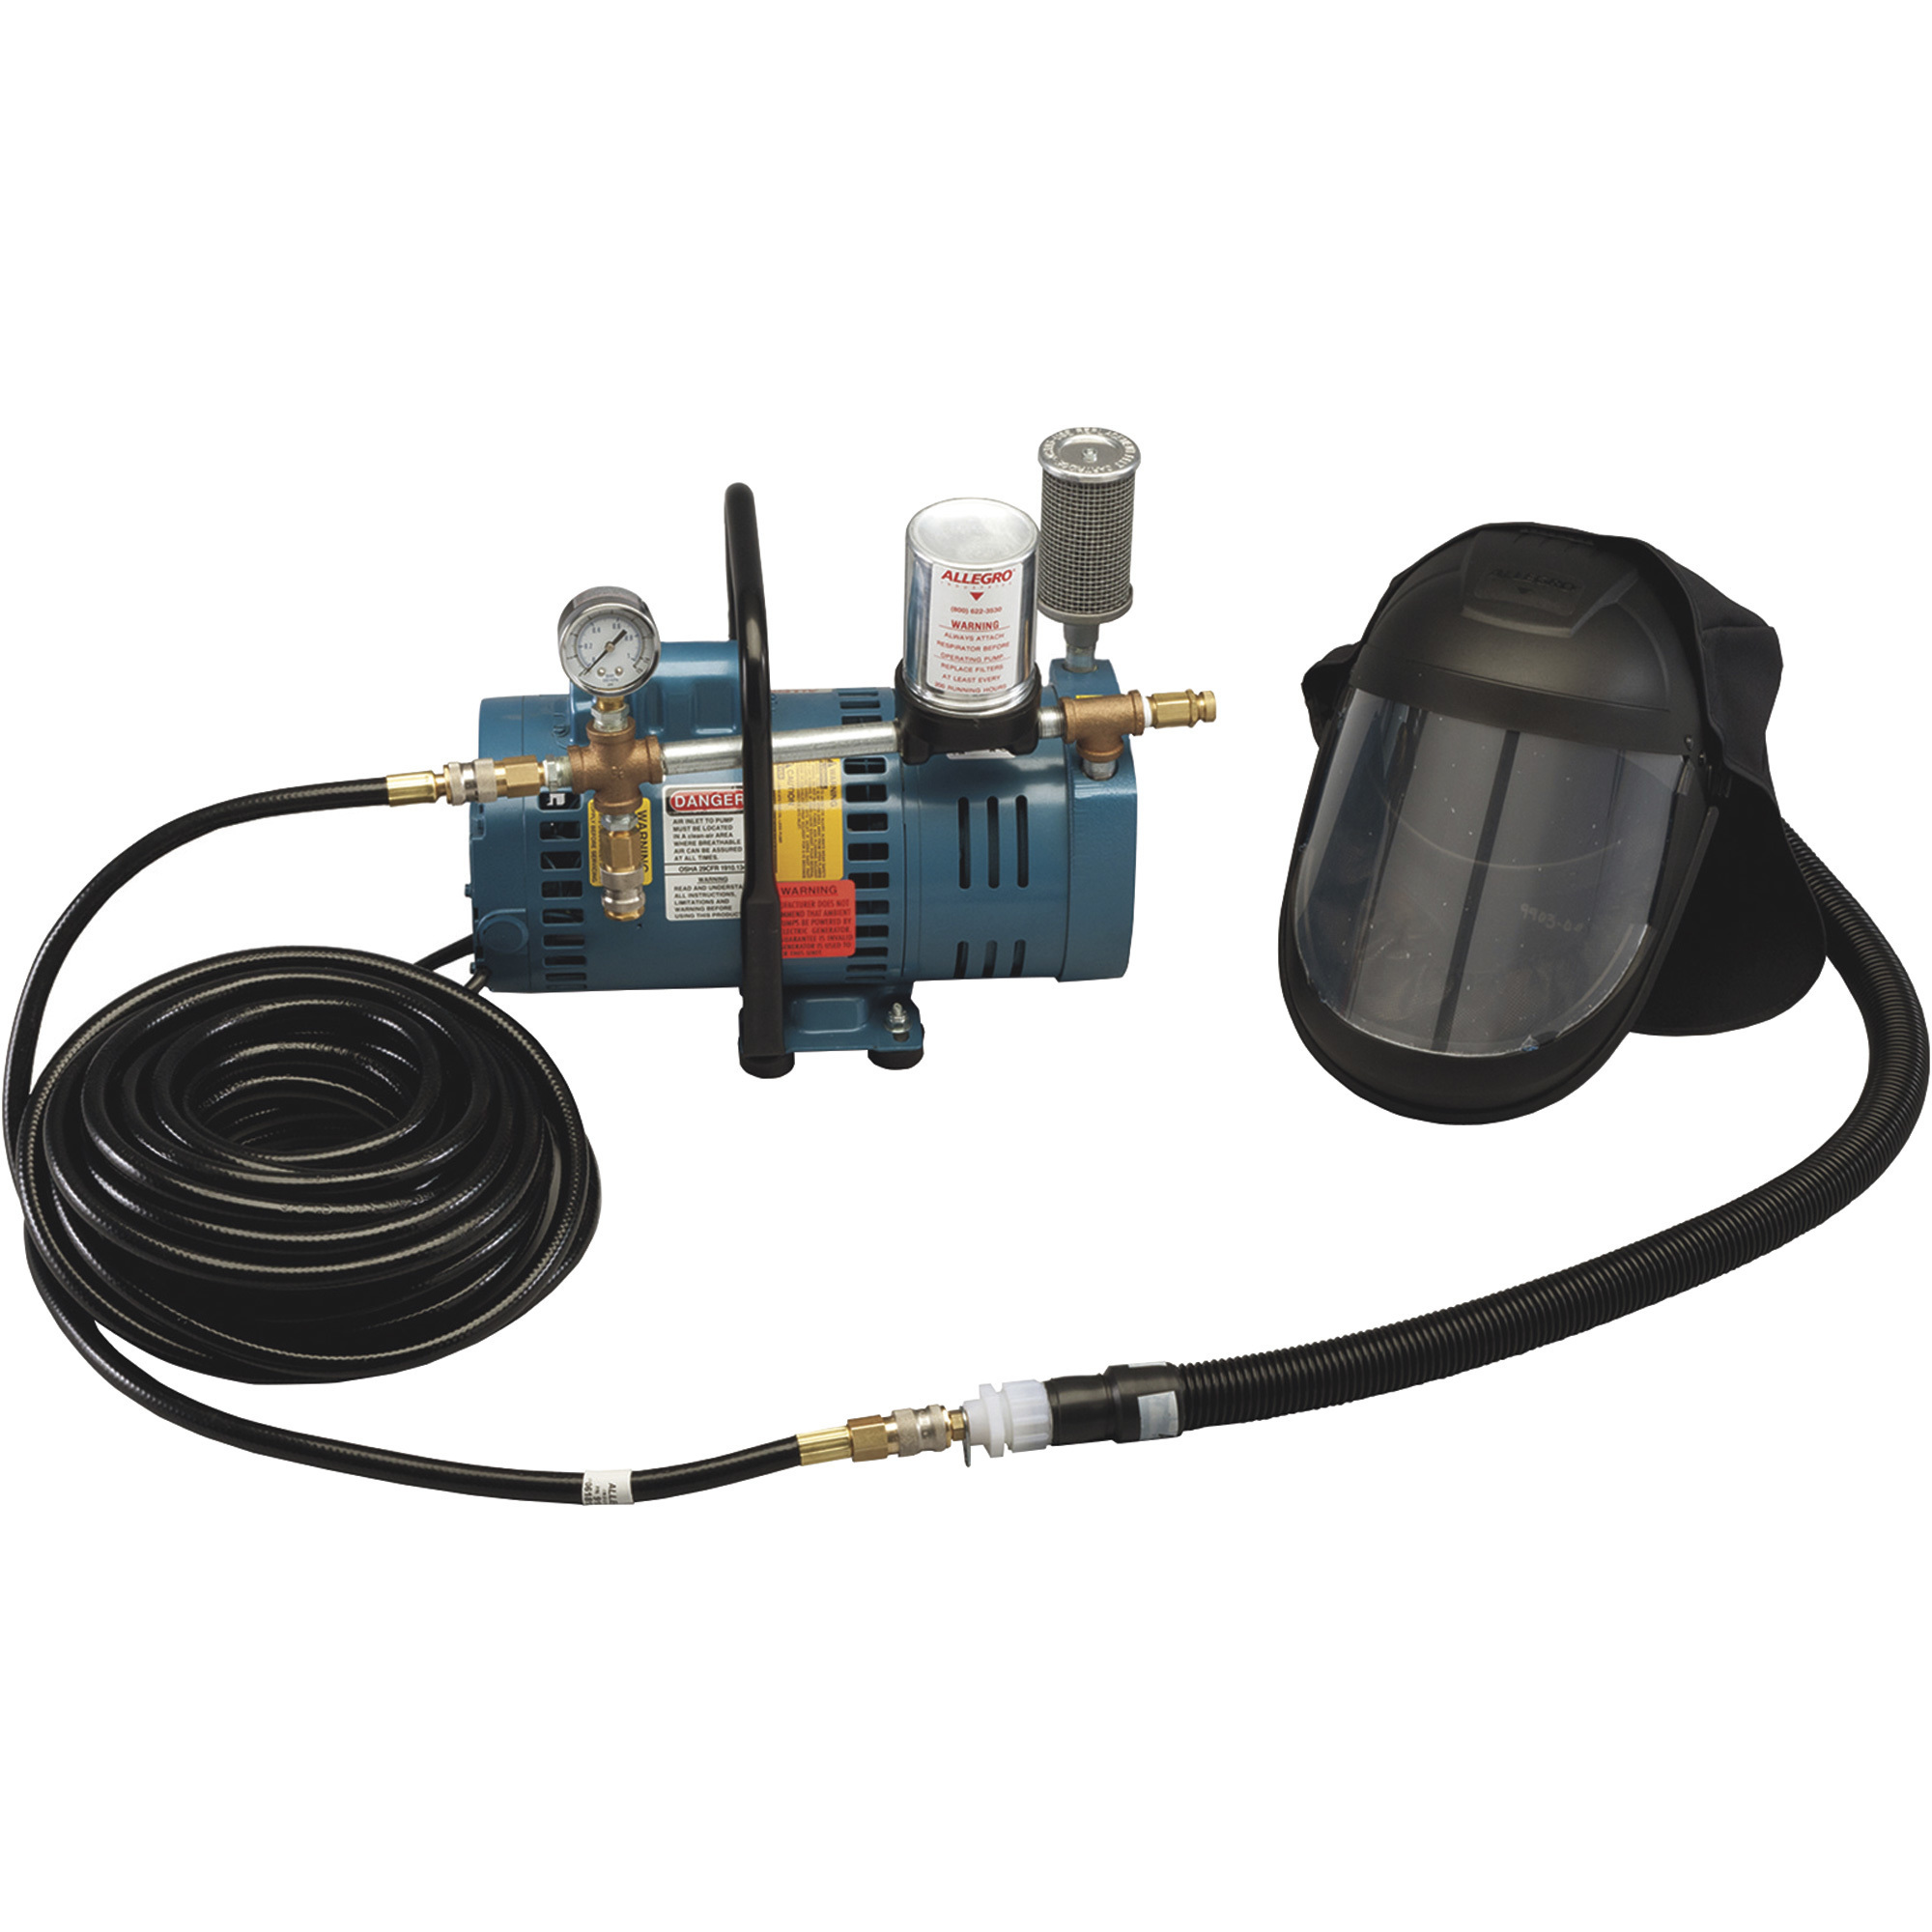 Allegro One Worker Supplied Air Shield Respirator System, One Pump and One 50ft. Breathing Air Hose, Model 9245-01